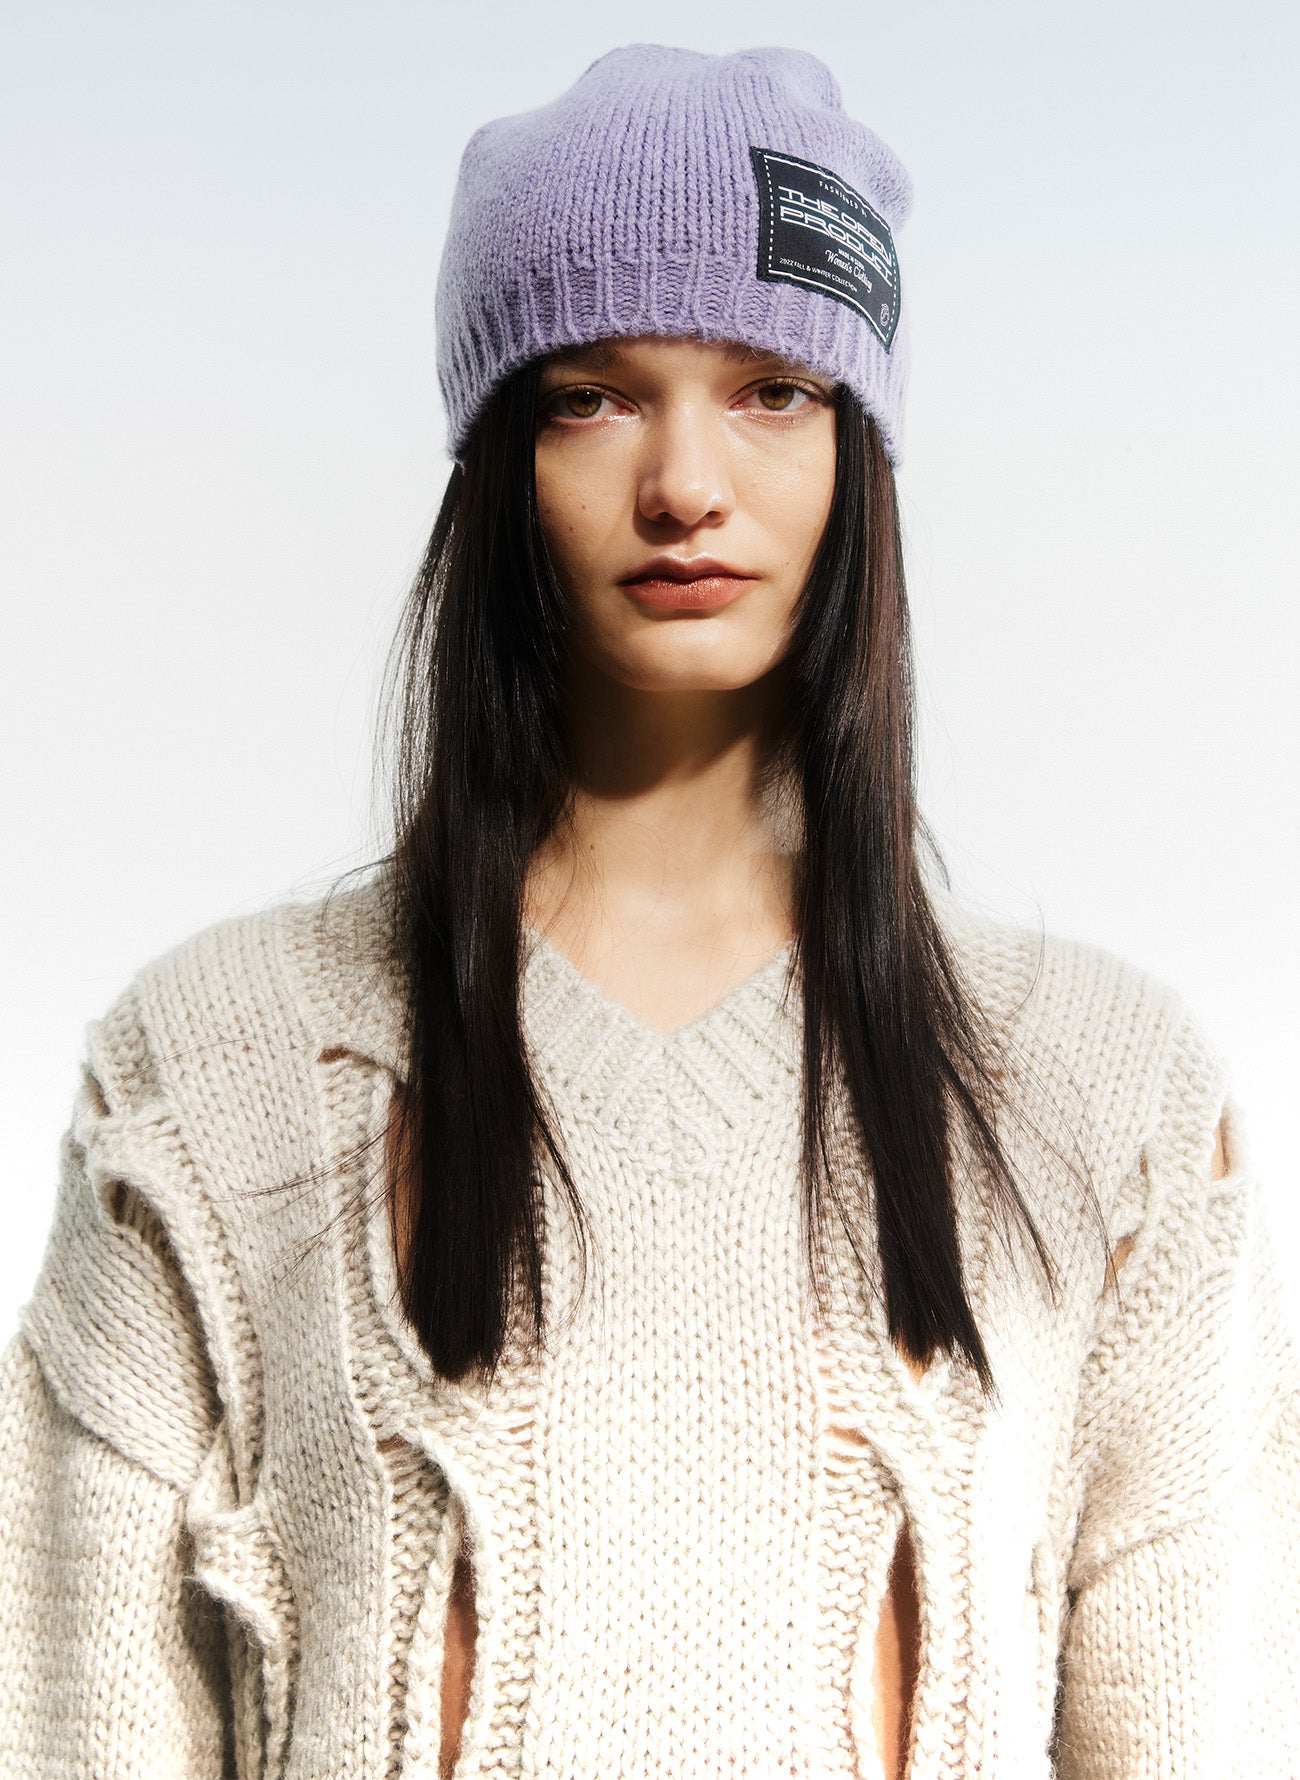 Patched Wool Blended Beanie (Multi-color)